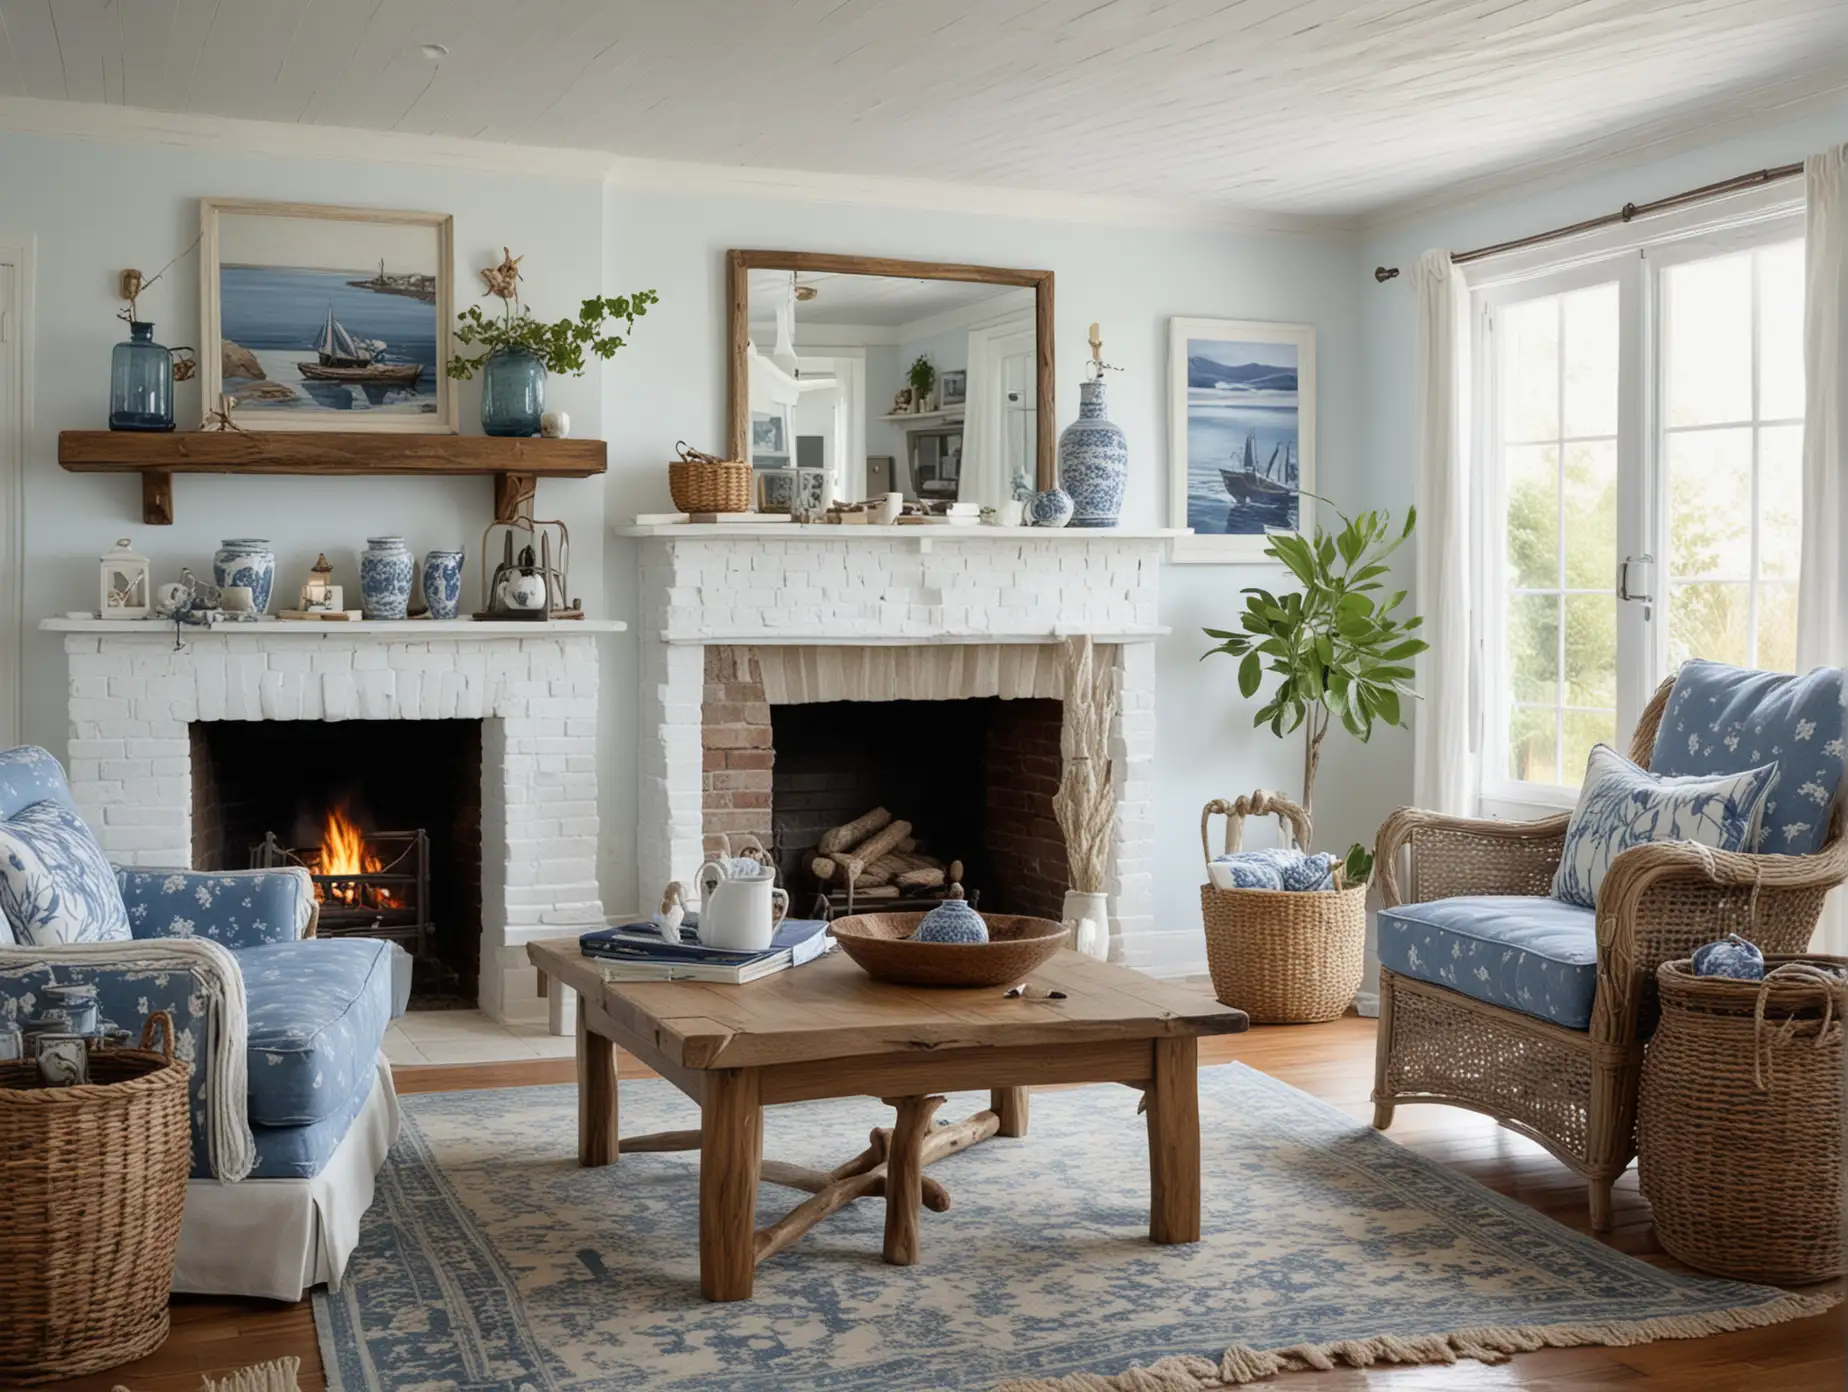 A panoramic view from the door of A retro coastal sitting room with blue and white decor, driftwood furniture, sea grape plants in woven baskets, nautical-themed accessories, and a window with rain gently falling outside, creating a serene seaside atmosphere. The wide shot reveals a vintage fireplace, a rustic coffee table, and additional seating with a farmhouse-style armchair and side table.